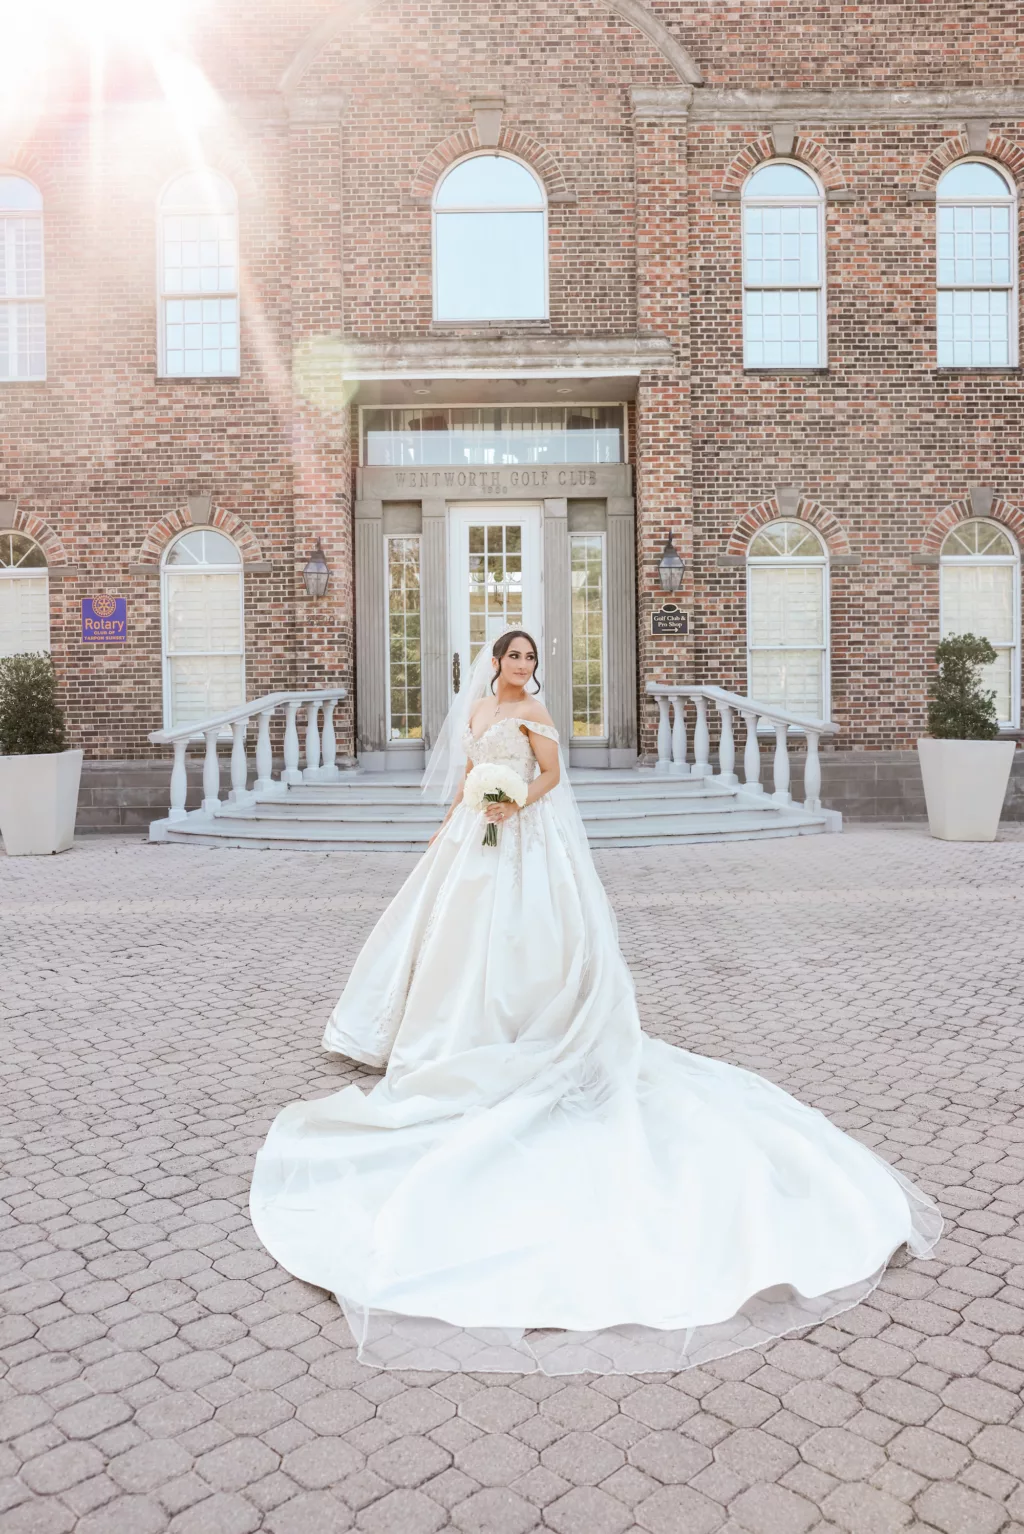 Ivory Off The Shoulder Beaded Bodice A-Line Ballgown Stephen Yearick Couture Wedding Dress Inspiration | Cathedral Length Veil Ideas | Tampa Bay Photographer Lifelong Photography Studio | Hair and Makeup Artist Femme Akoi Beauty Studio | Planner Special Moments Event Planning